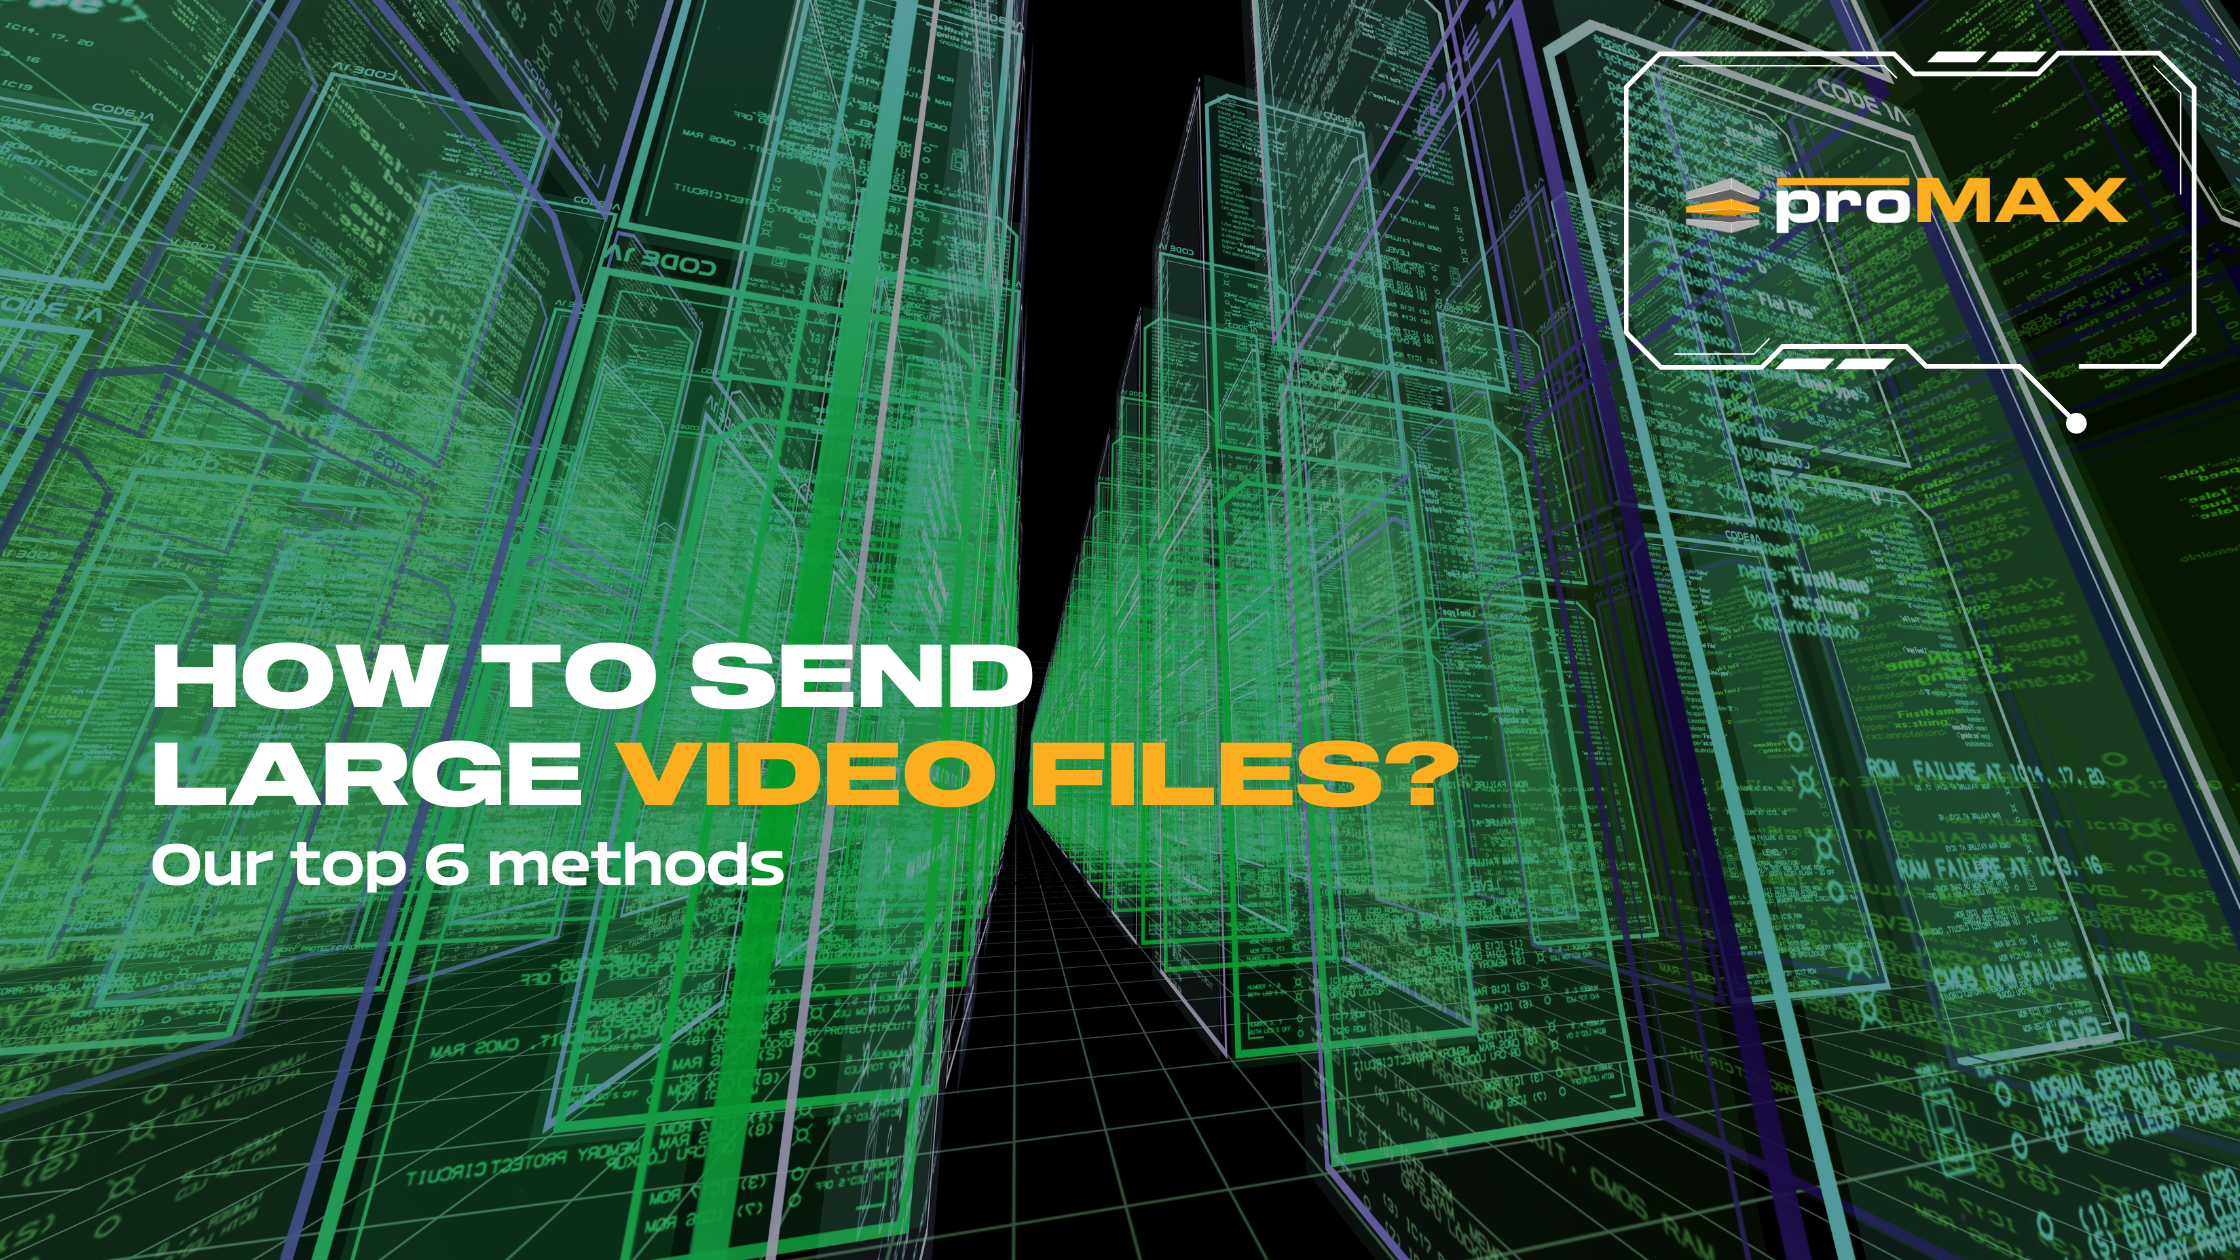 How to Send Large Video Files? 6 Best Methods to Share Large Files